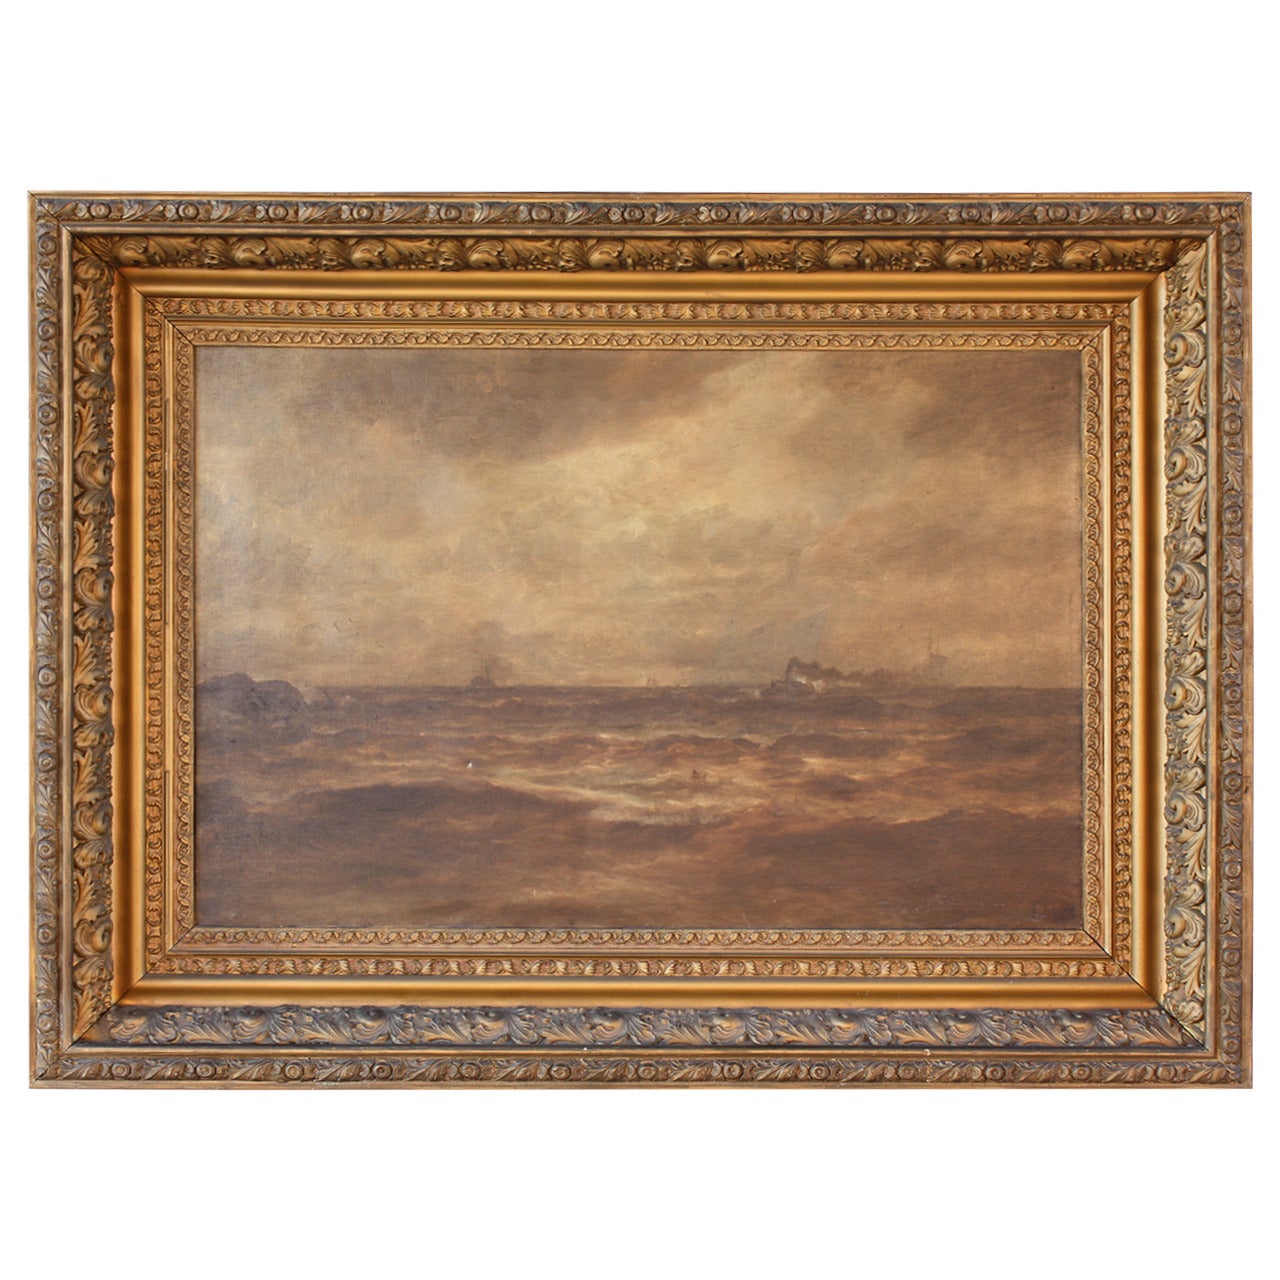 19th Century Seascape with Steam Ship by P F Lund For Sale